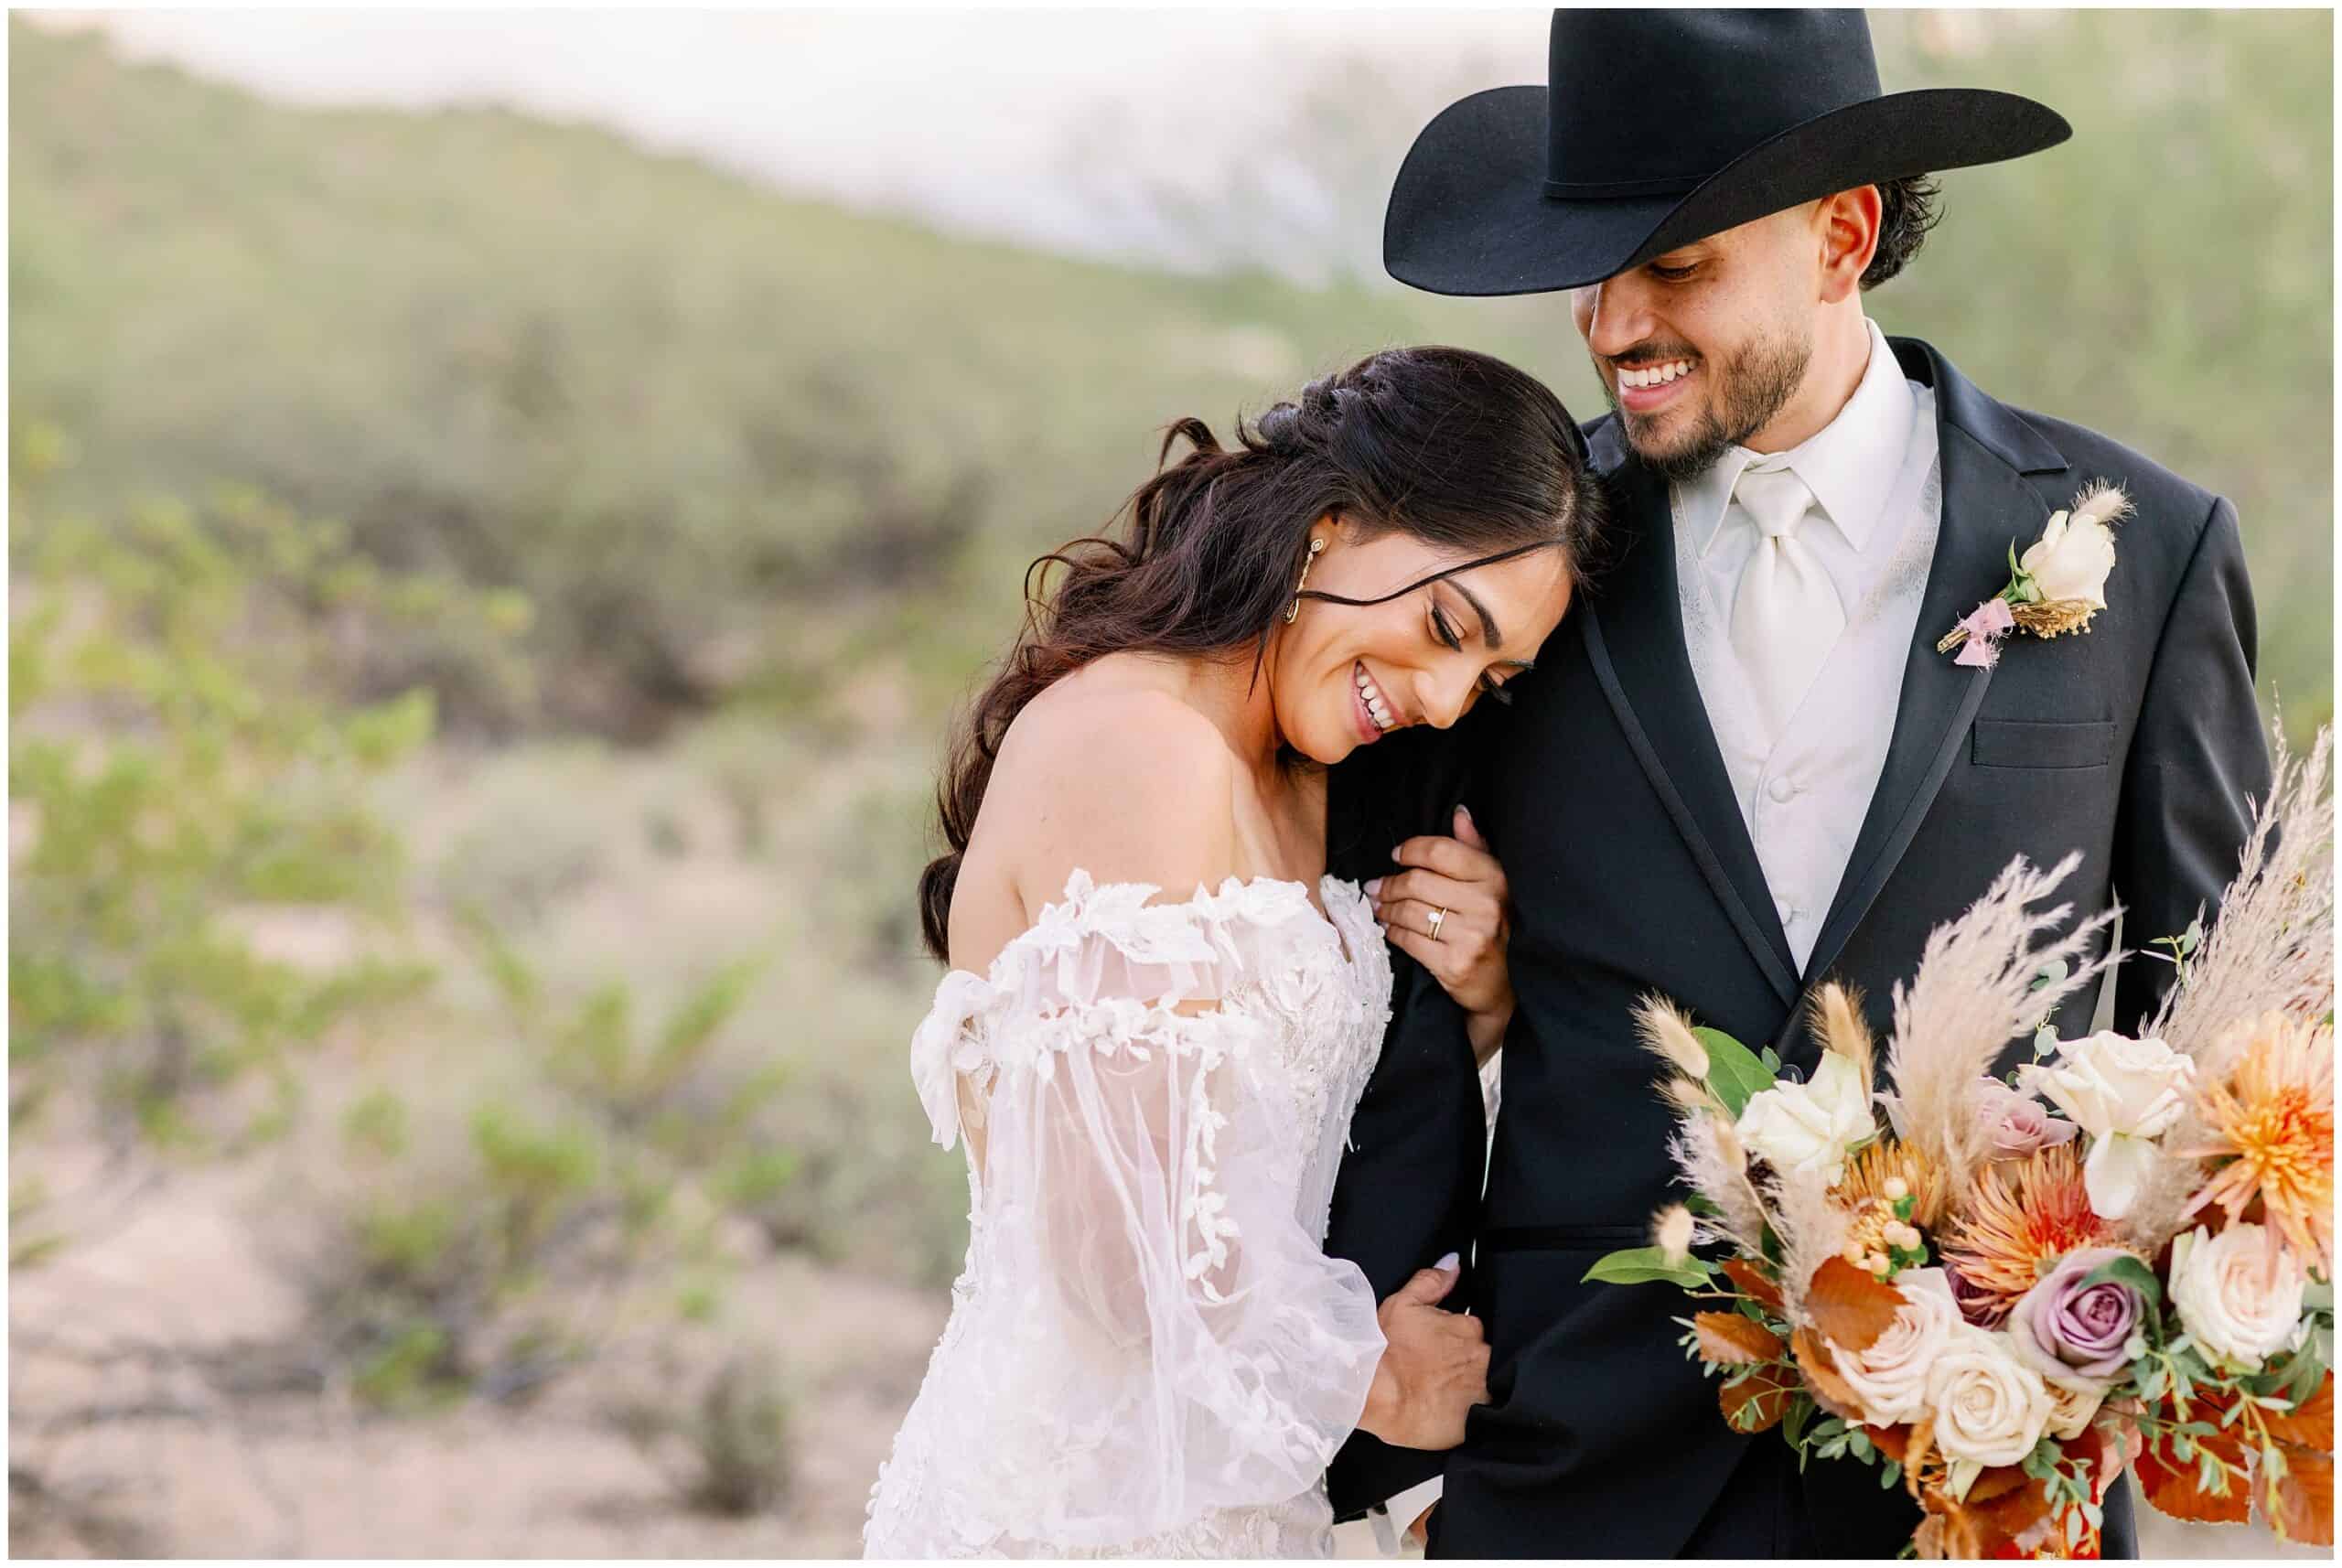 Tucson Bride and Groom on their wedding day captured by Melissa Fritzsche Photography